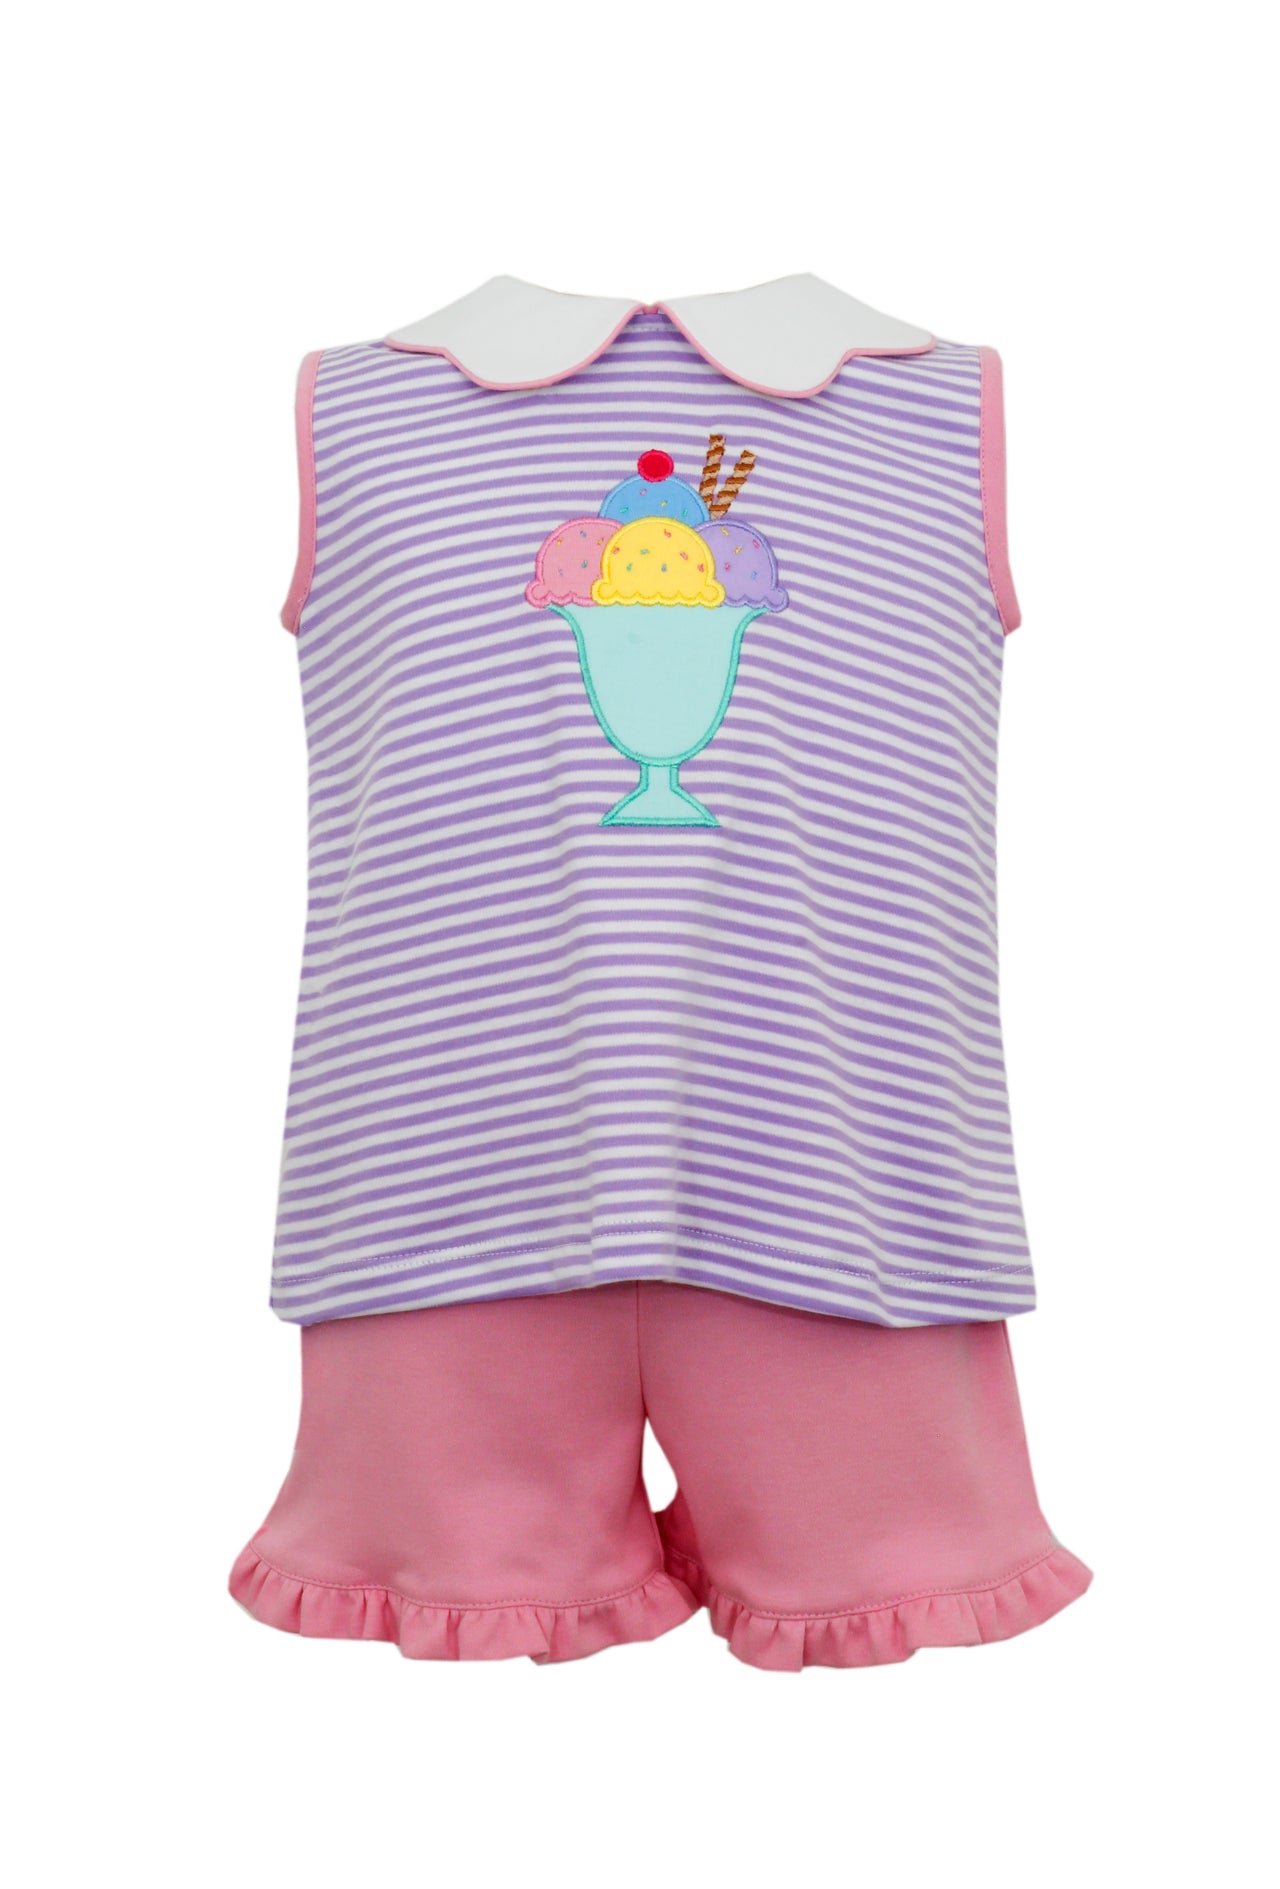 Claire & Charlie Ice Cream Sundae Lilac Knit Stripe Top W/Pink Knit Shorts 5010X-CS24 5103